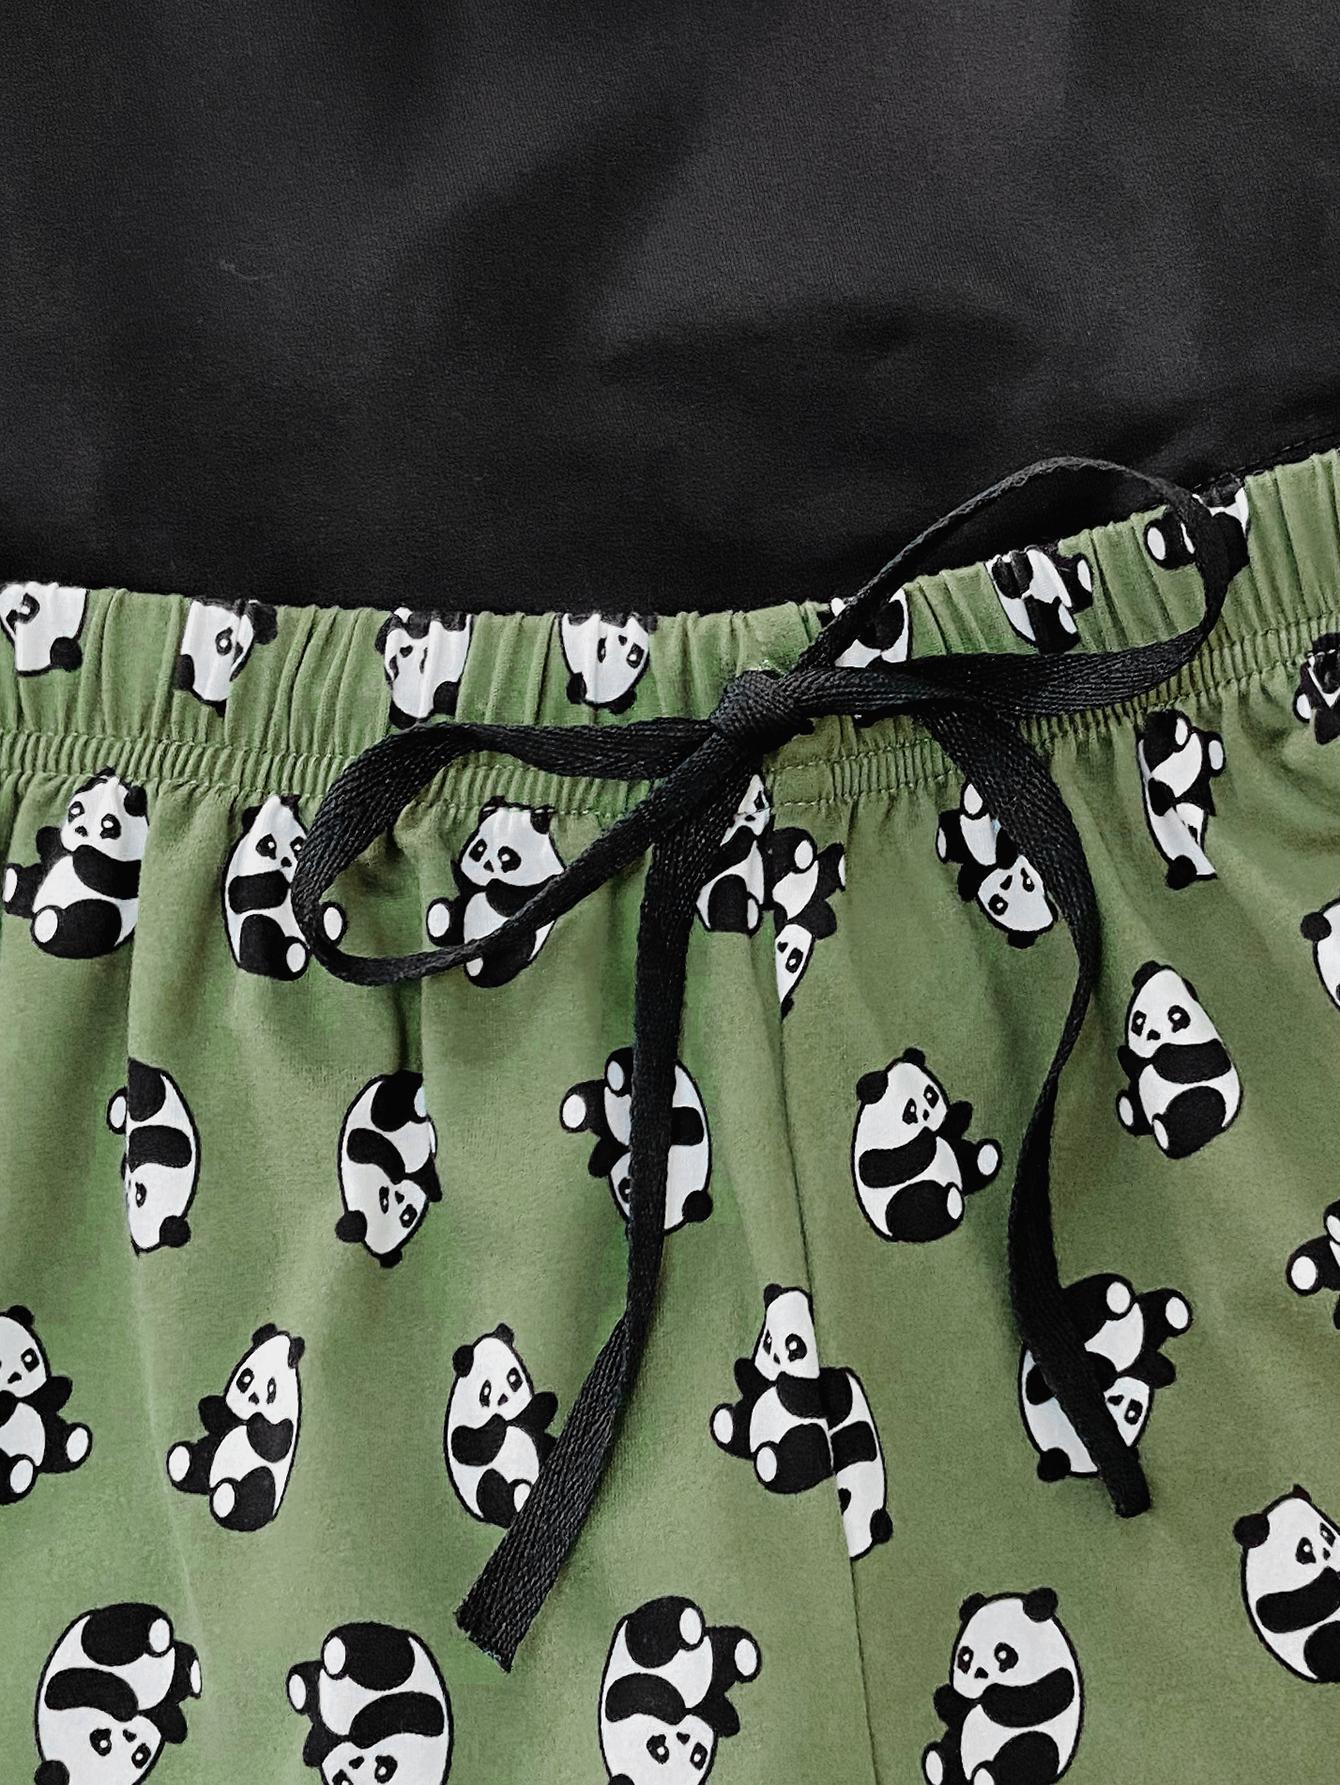 a close up of a pair of shorts with pandas on them